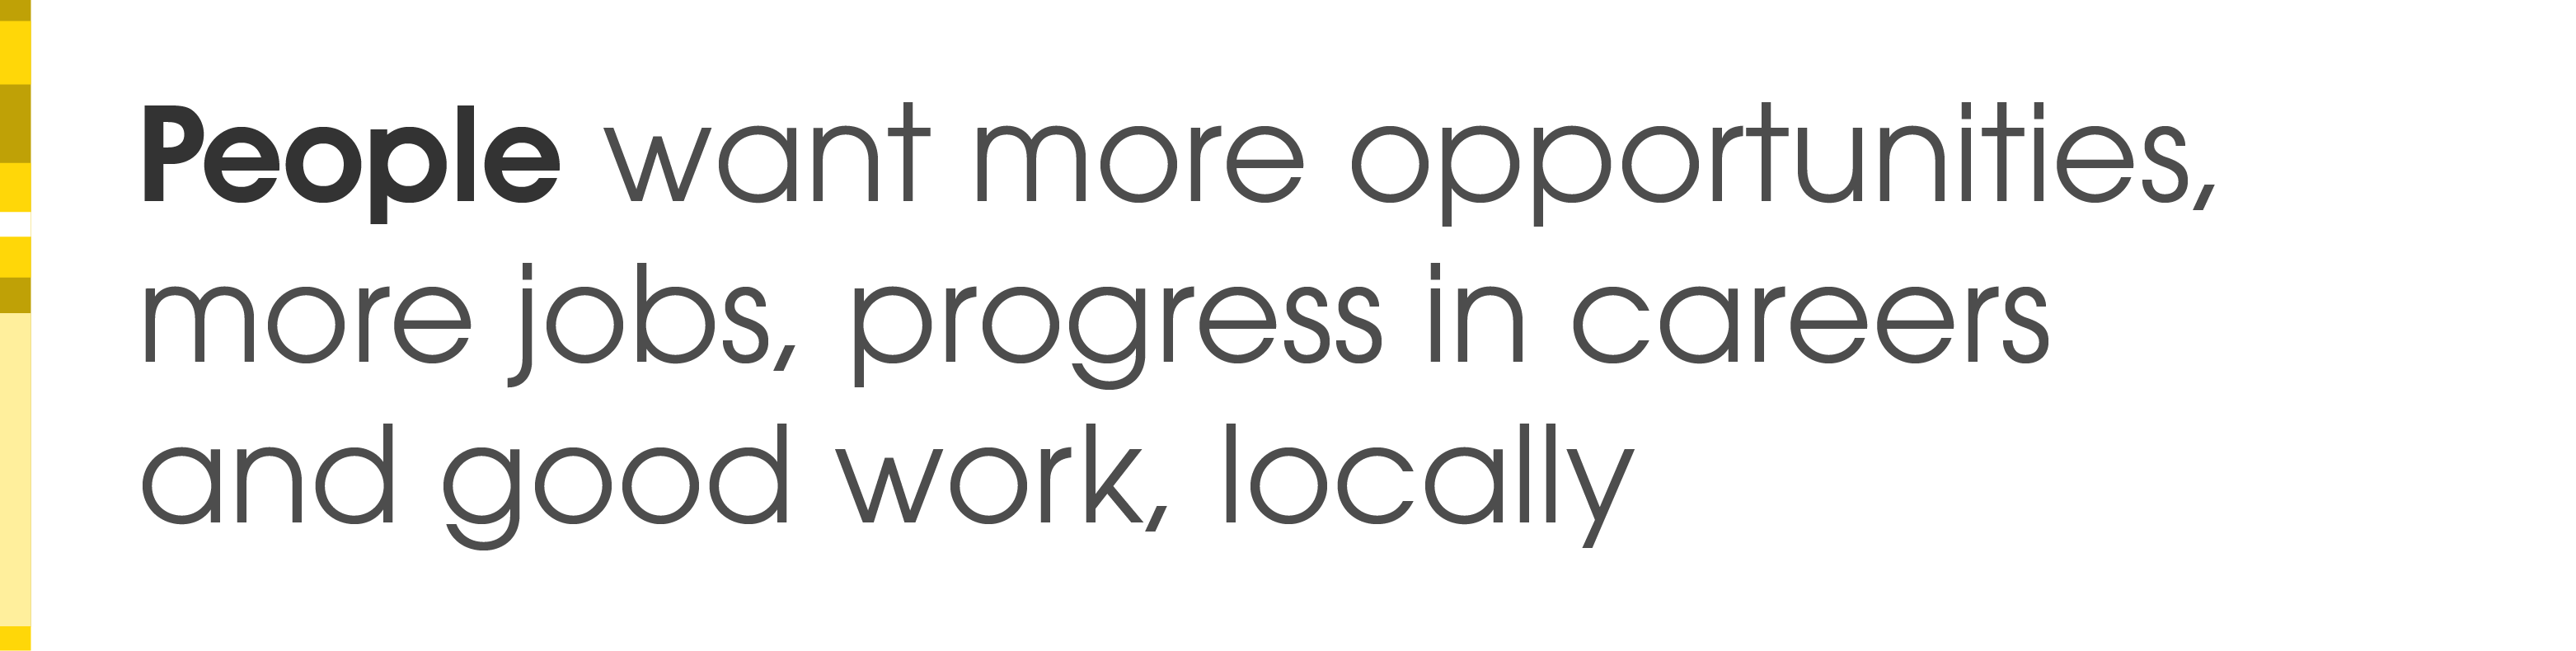 People want more opportunities, more jobs, progress in careers and good work, locally.